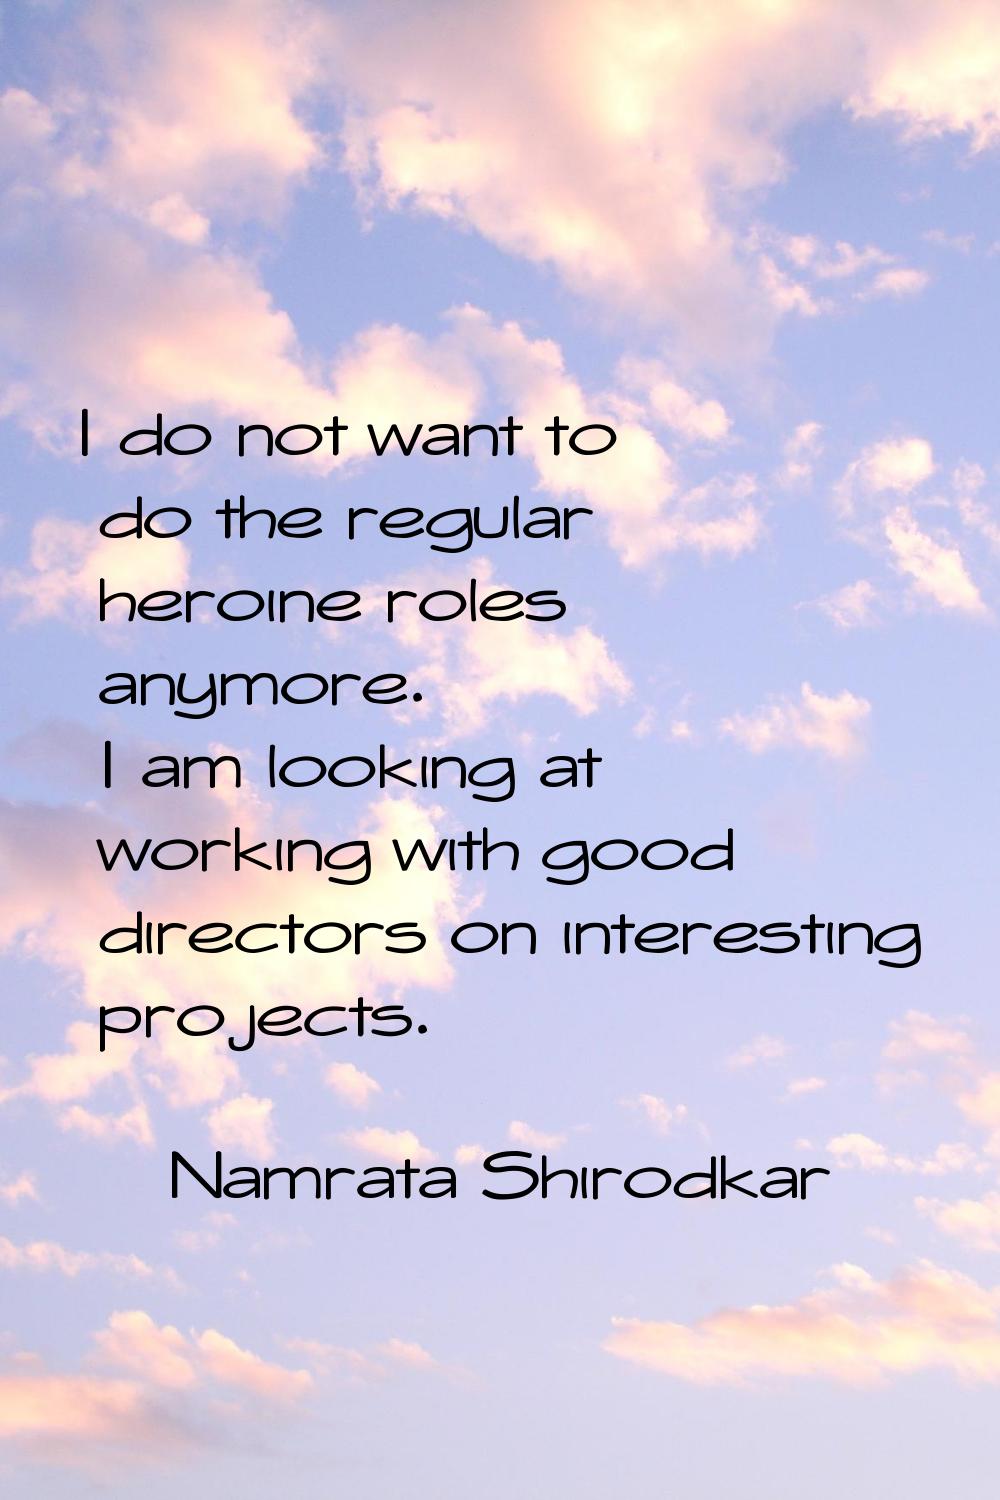 I do not want to do the regular heroine roles anymore. I am looking at working with good directors 